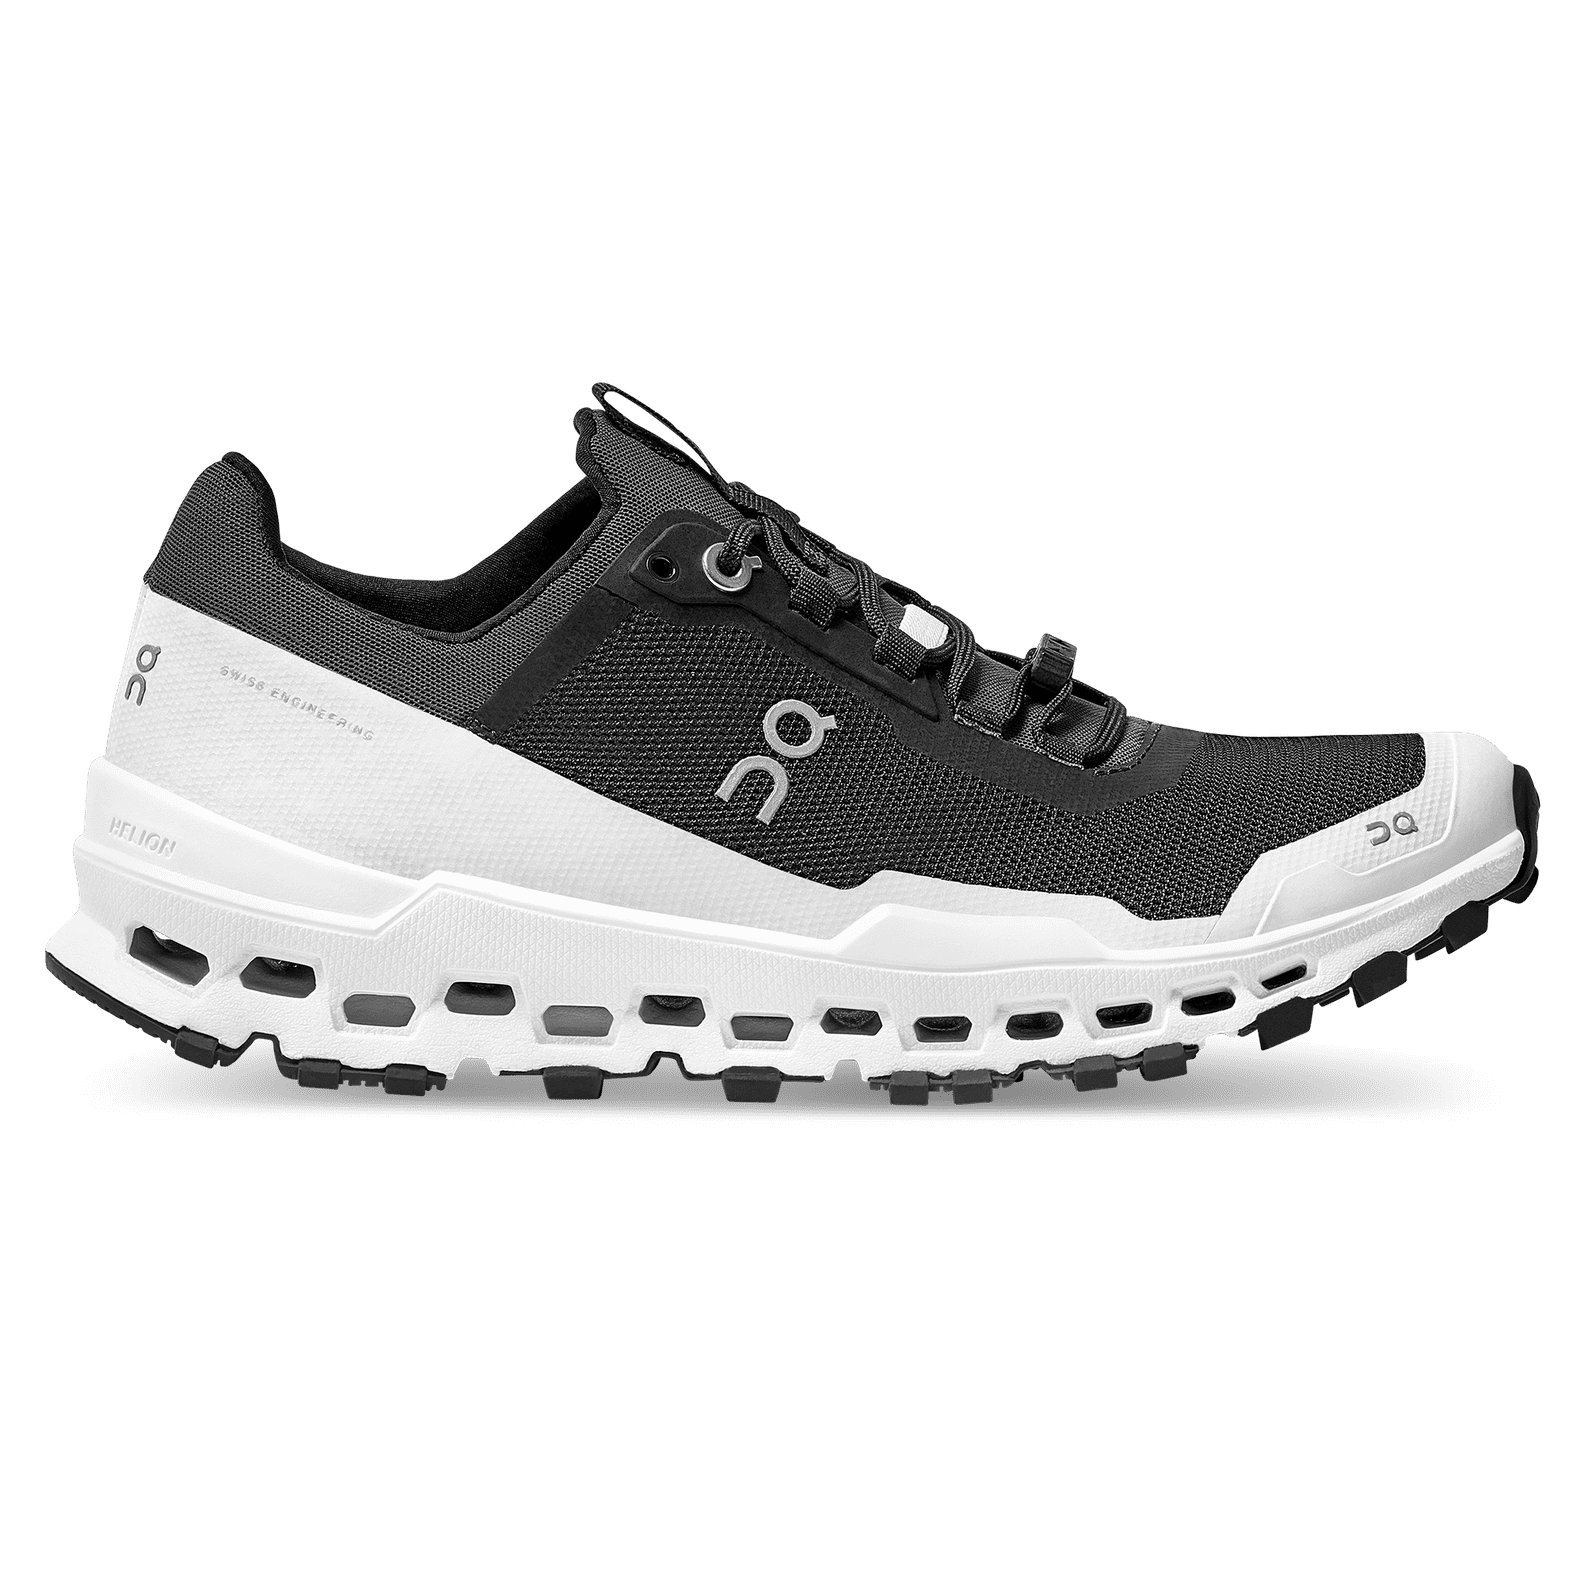 The Best Hiking and Trail Sneakers 2021 | POPSUGAR Fitness